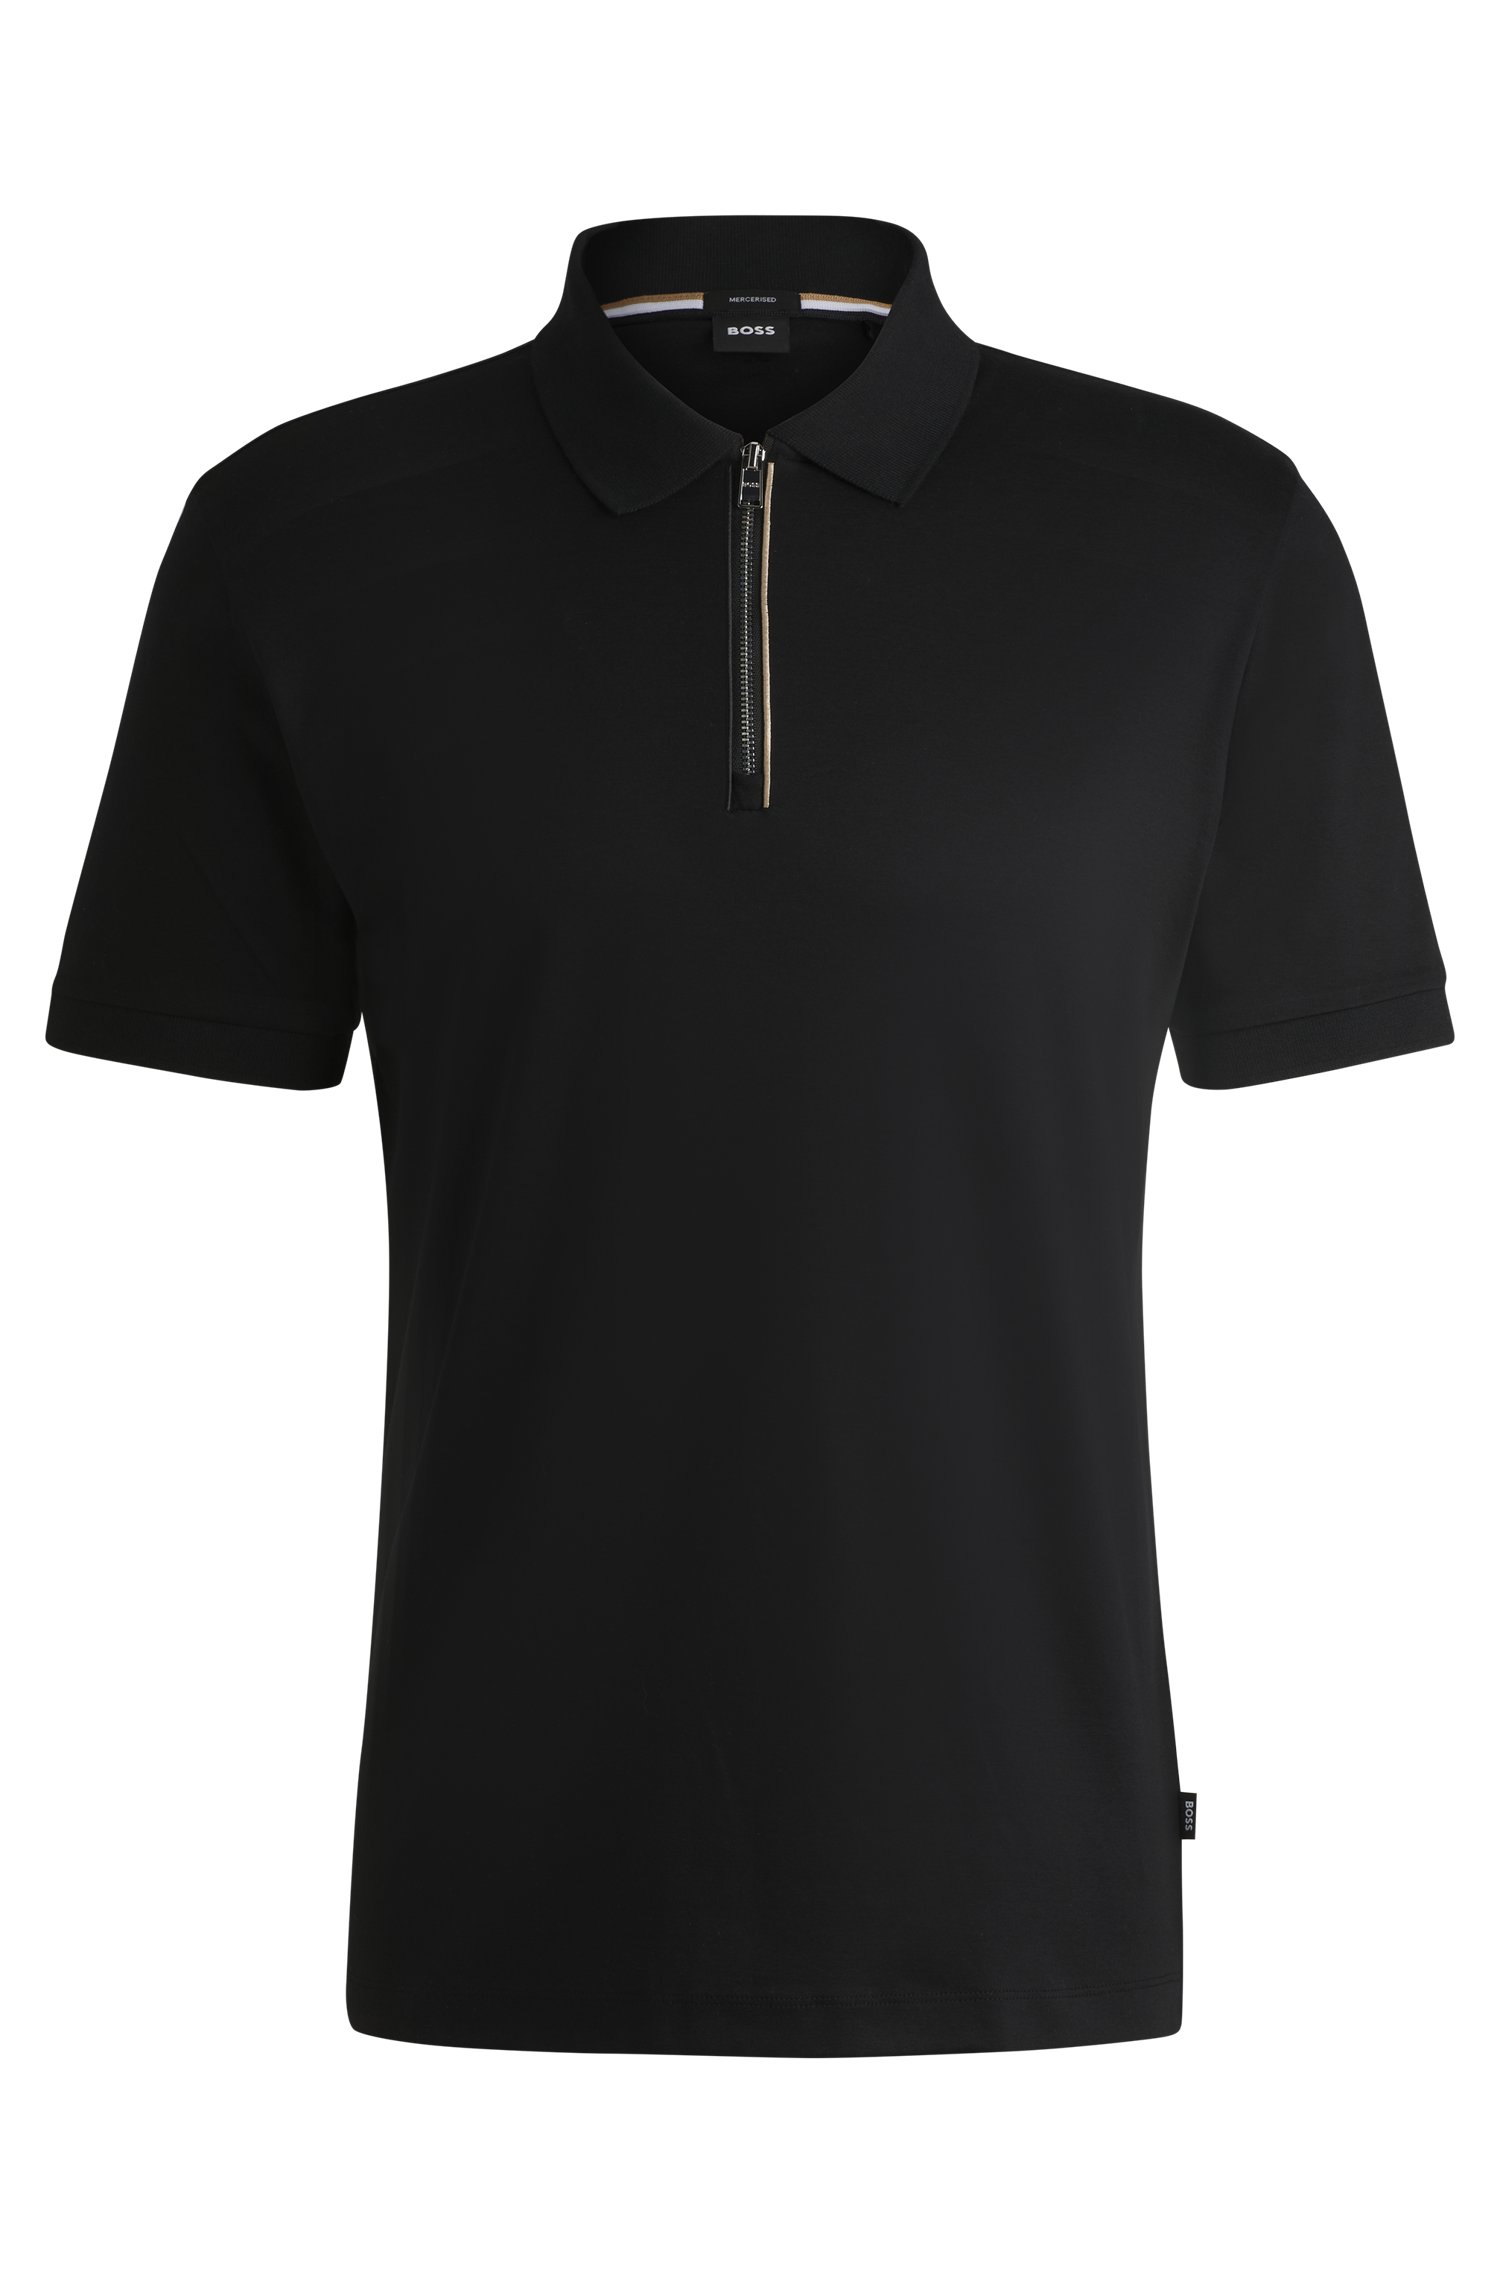 Mercerized-cotton slim-fit polo shirt with zip placket